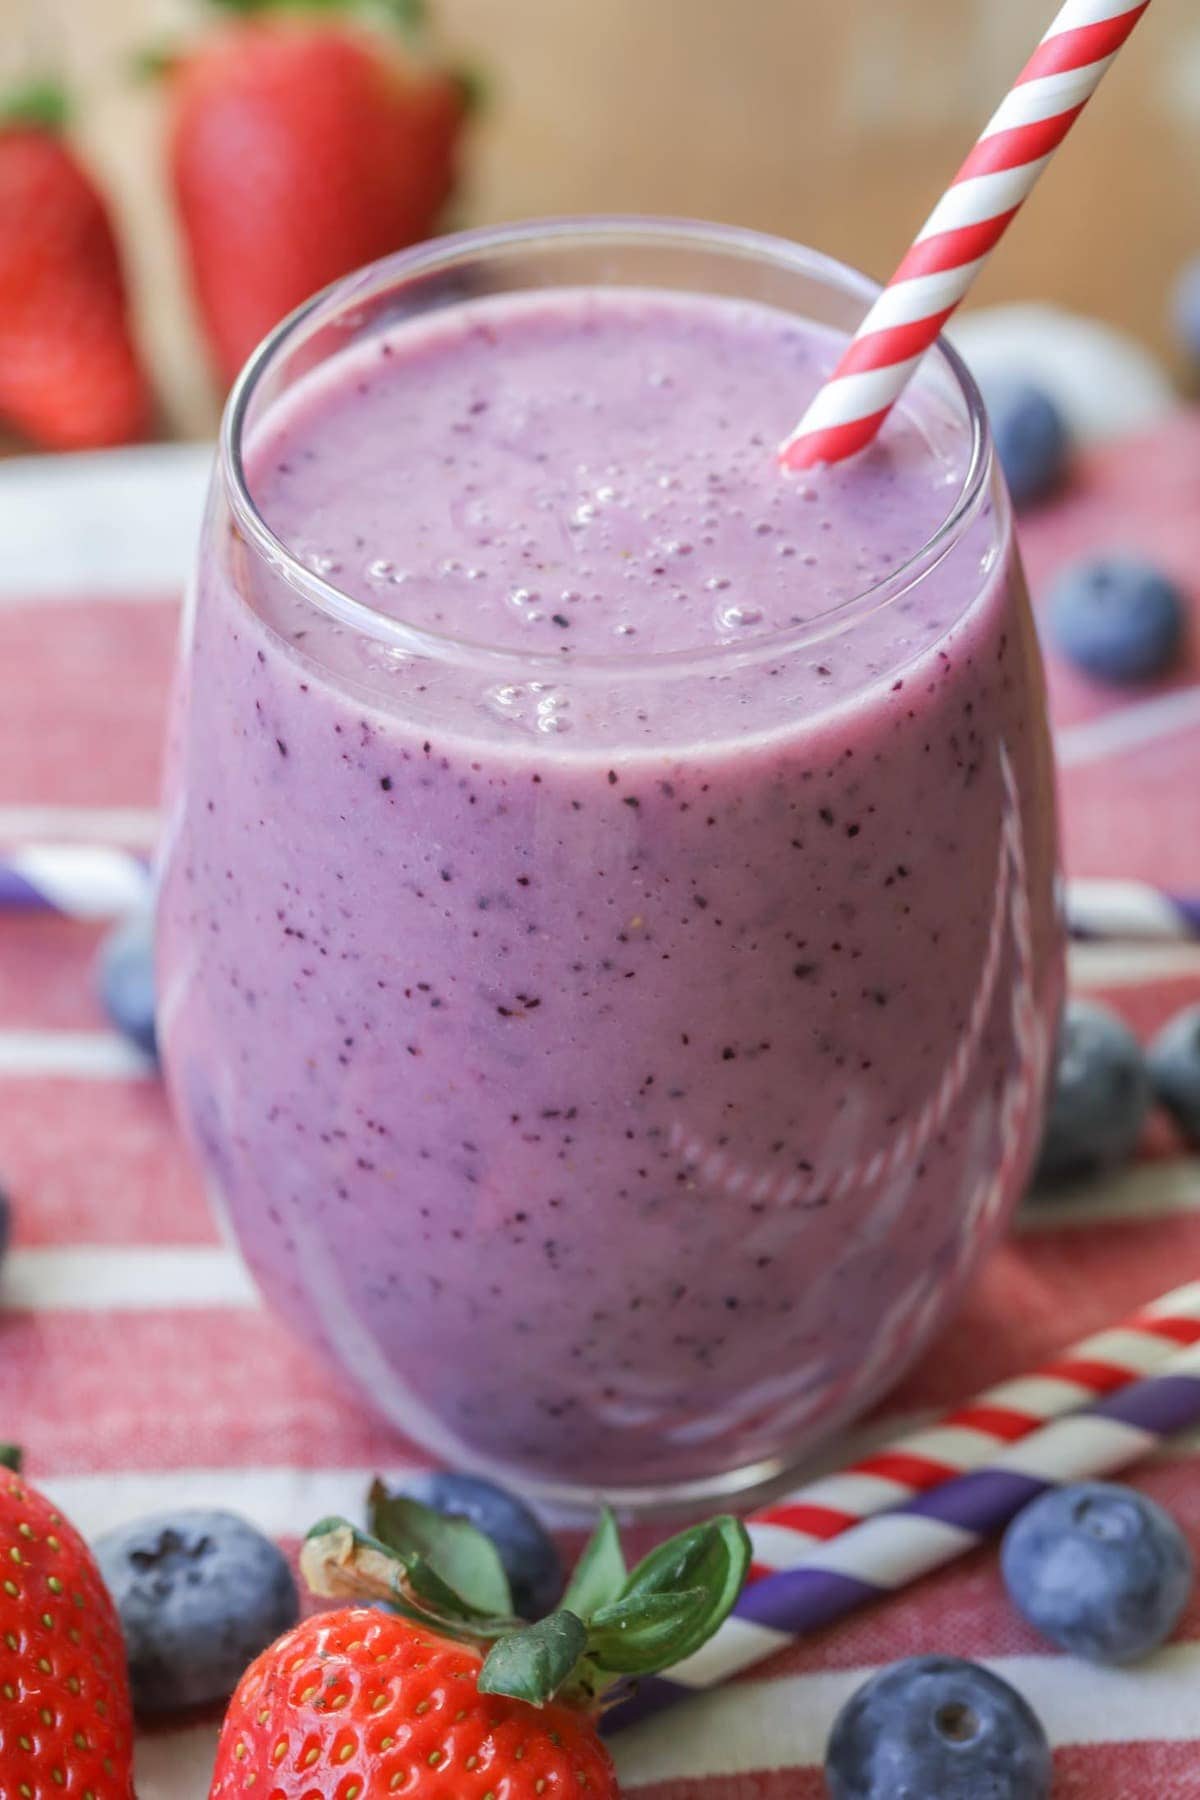 Pineapple banana smoothie - a glass filled with blueberry smoothie.